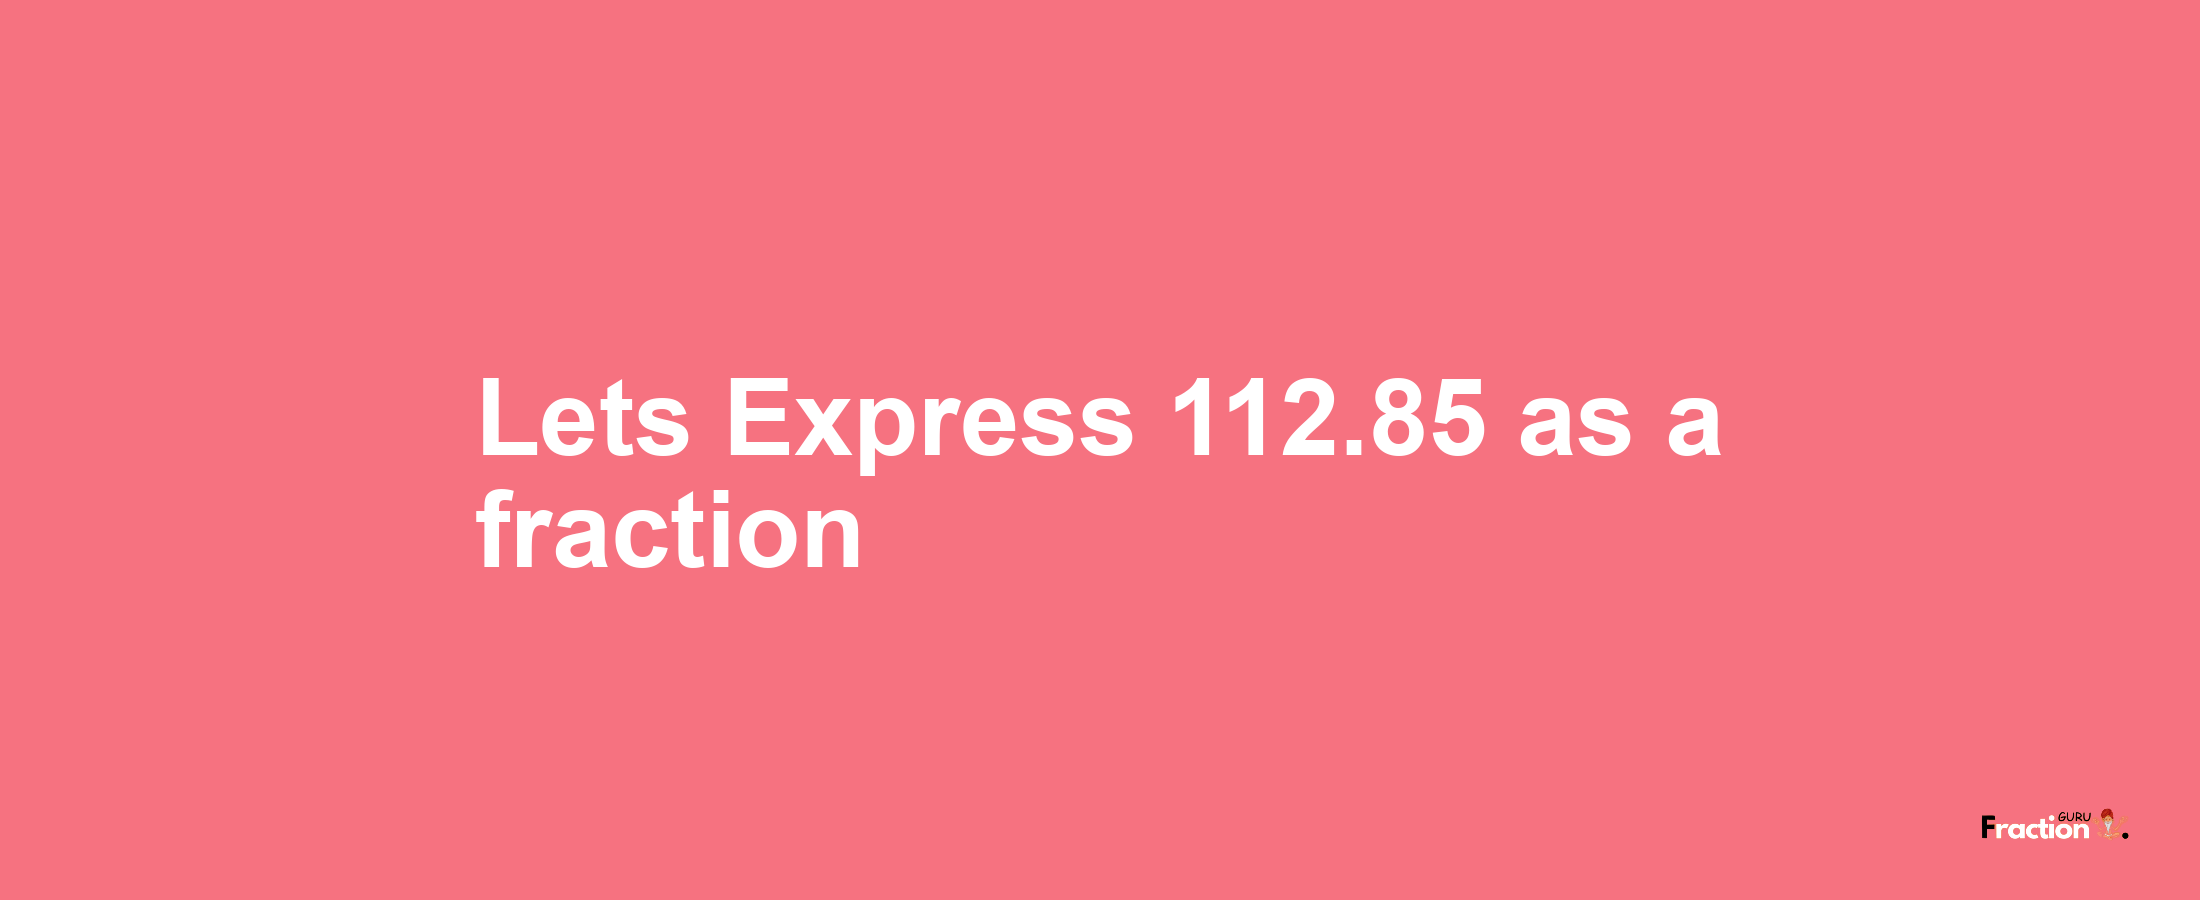 Lets Express 112.85 as afraction